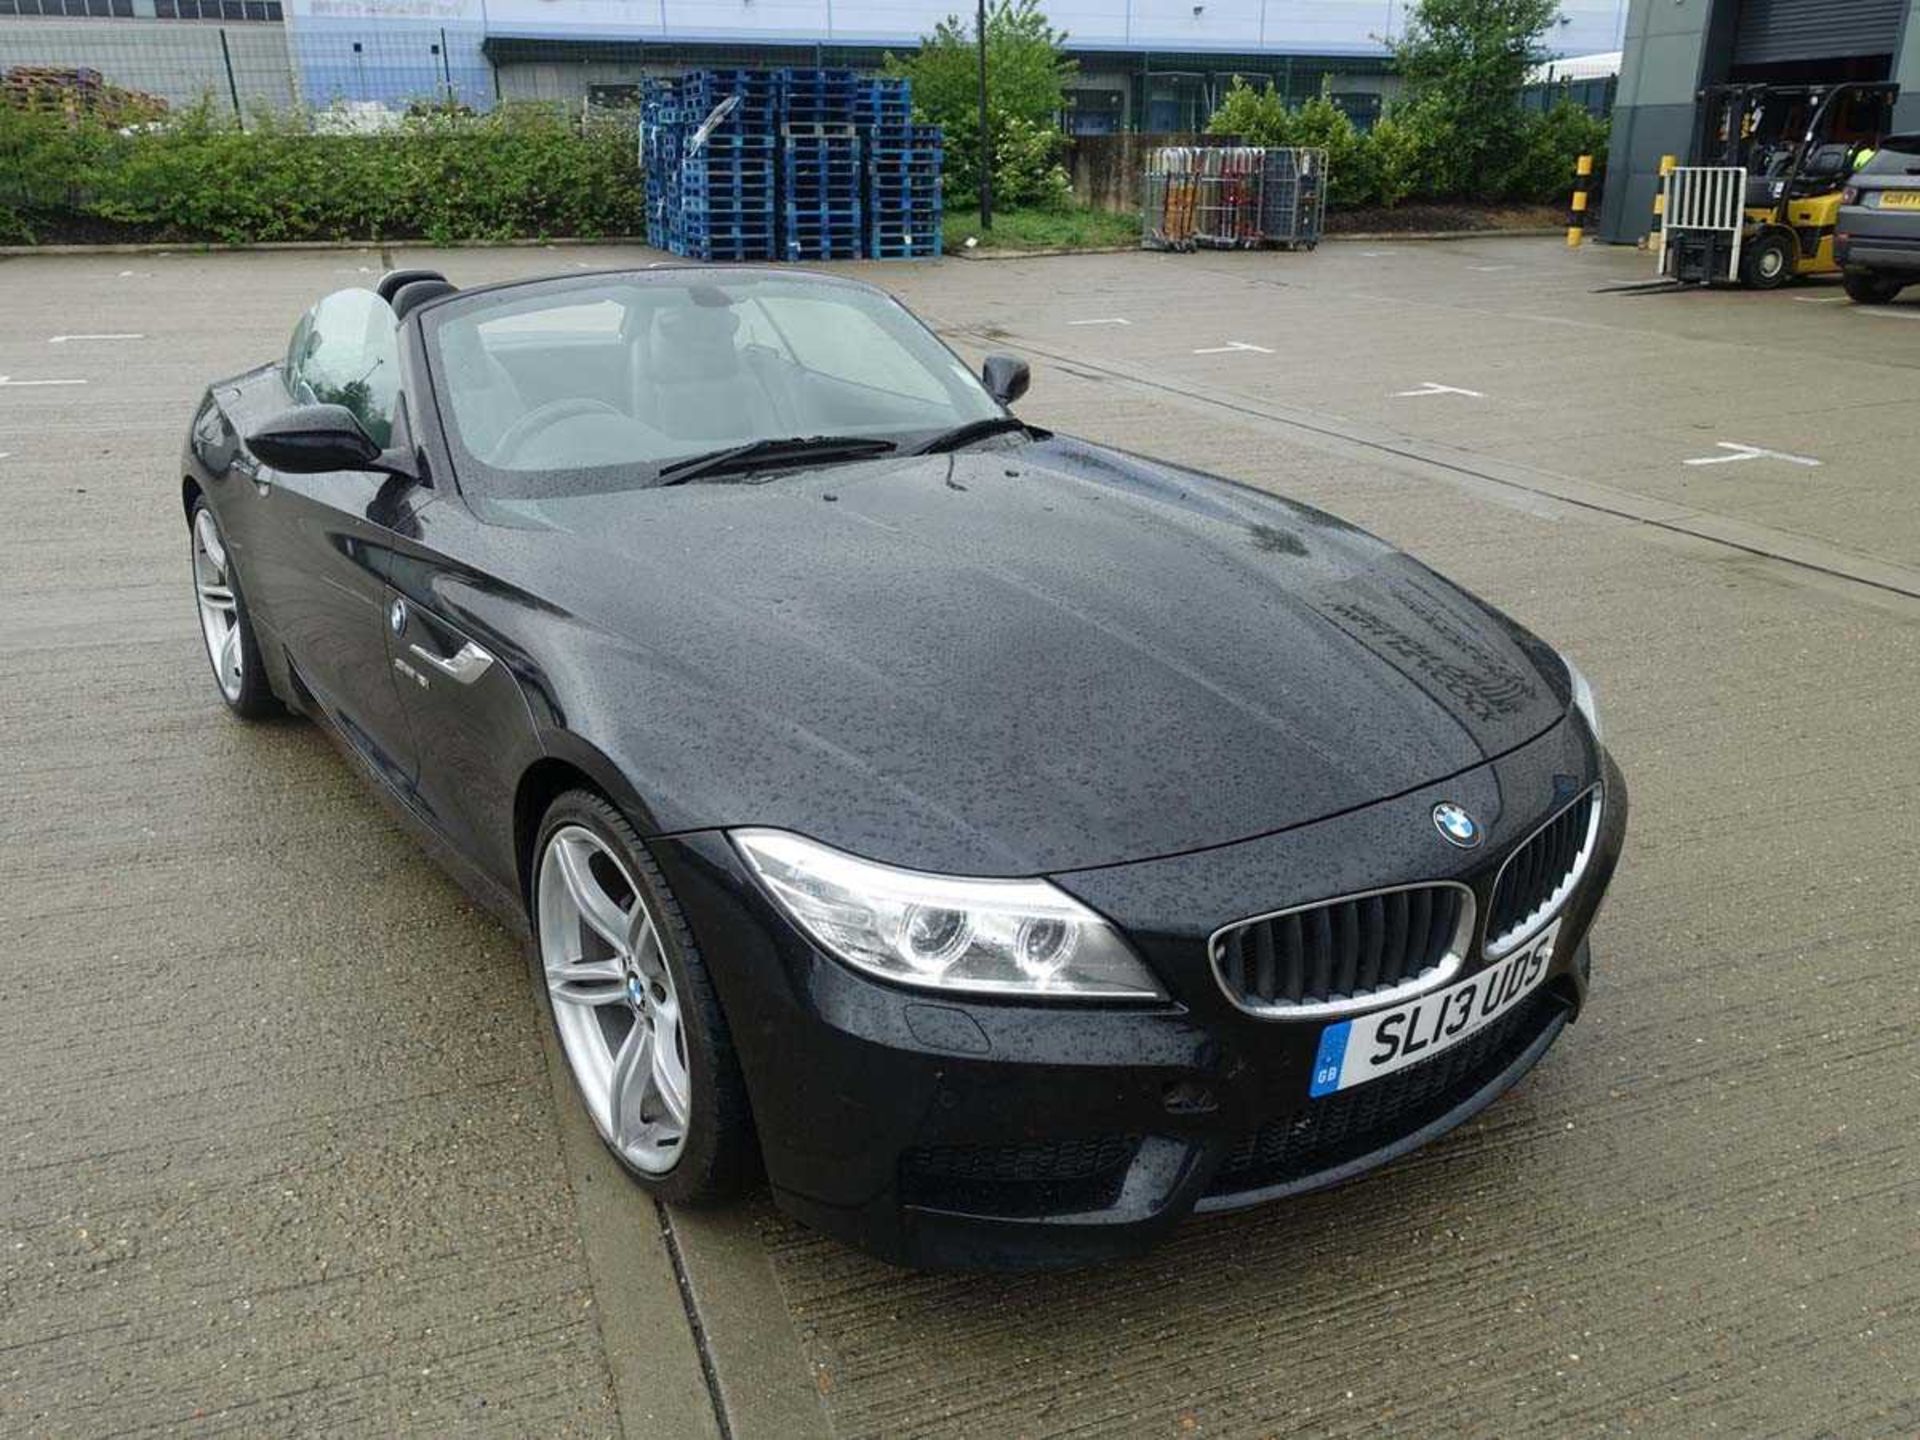 (2013) BMW ZR Drive 18I M sport convertible in black, petrol 1997cc, first registered 13/05/ - Image 16 of 19